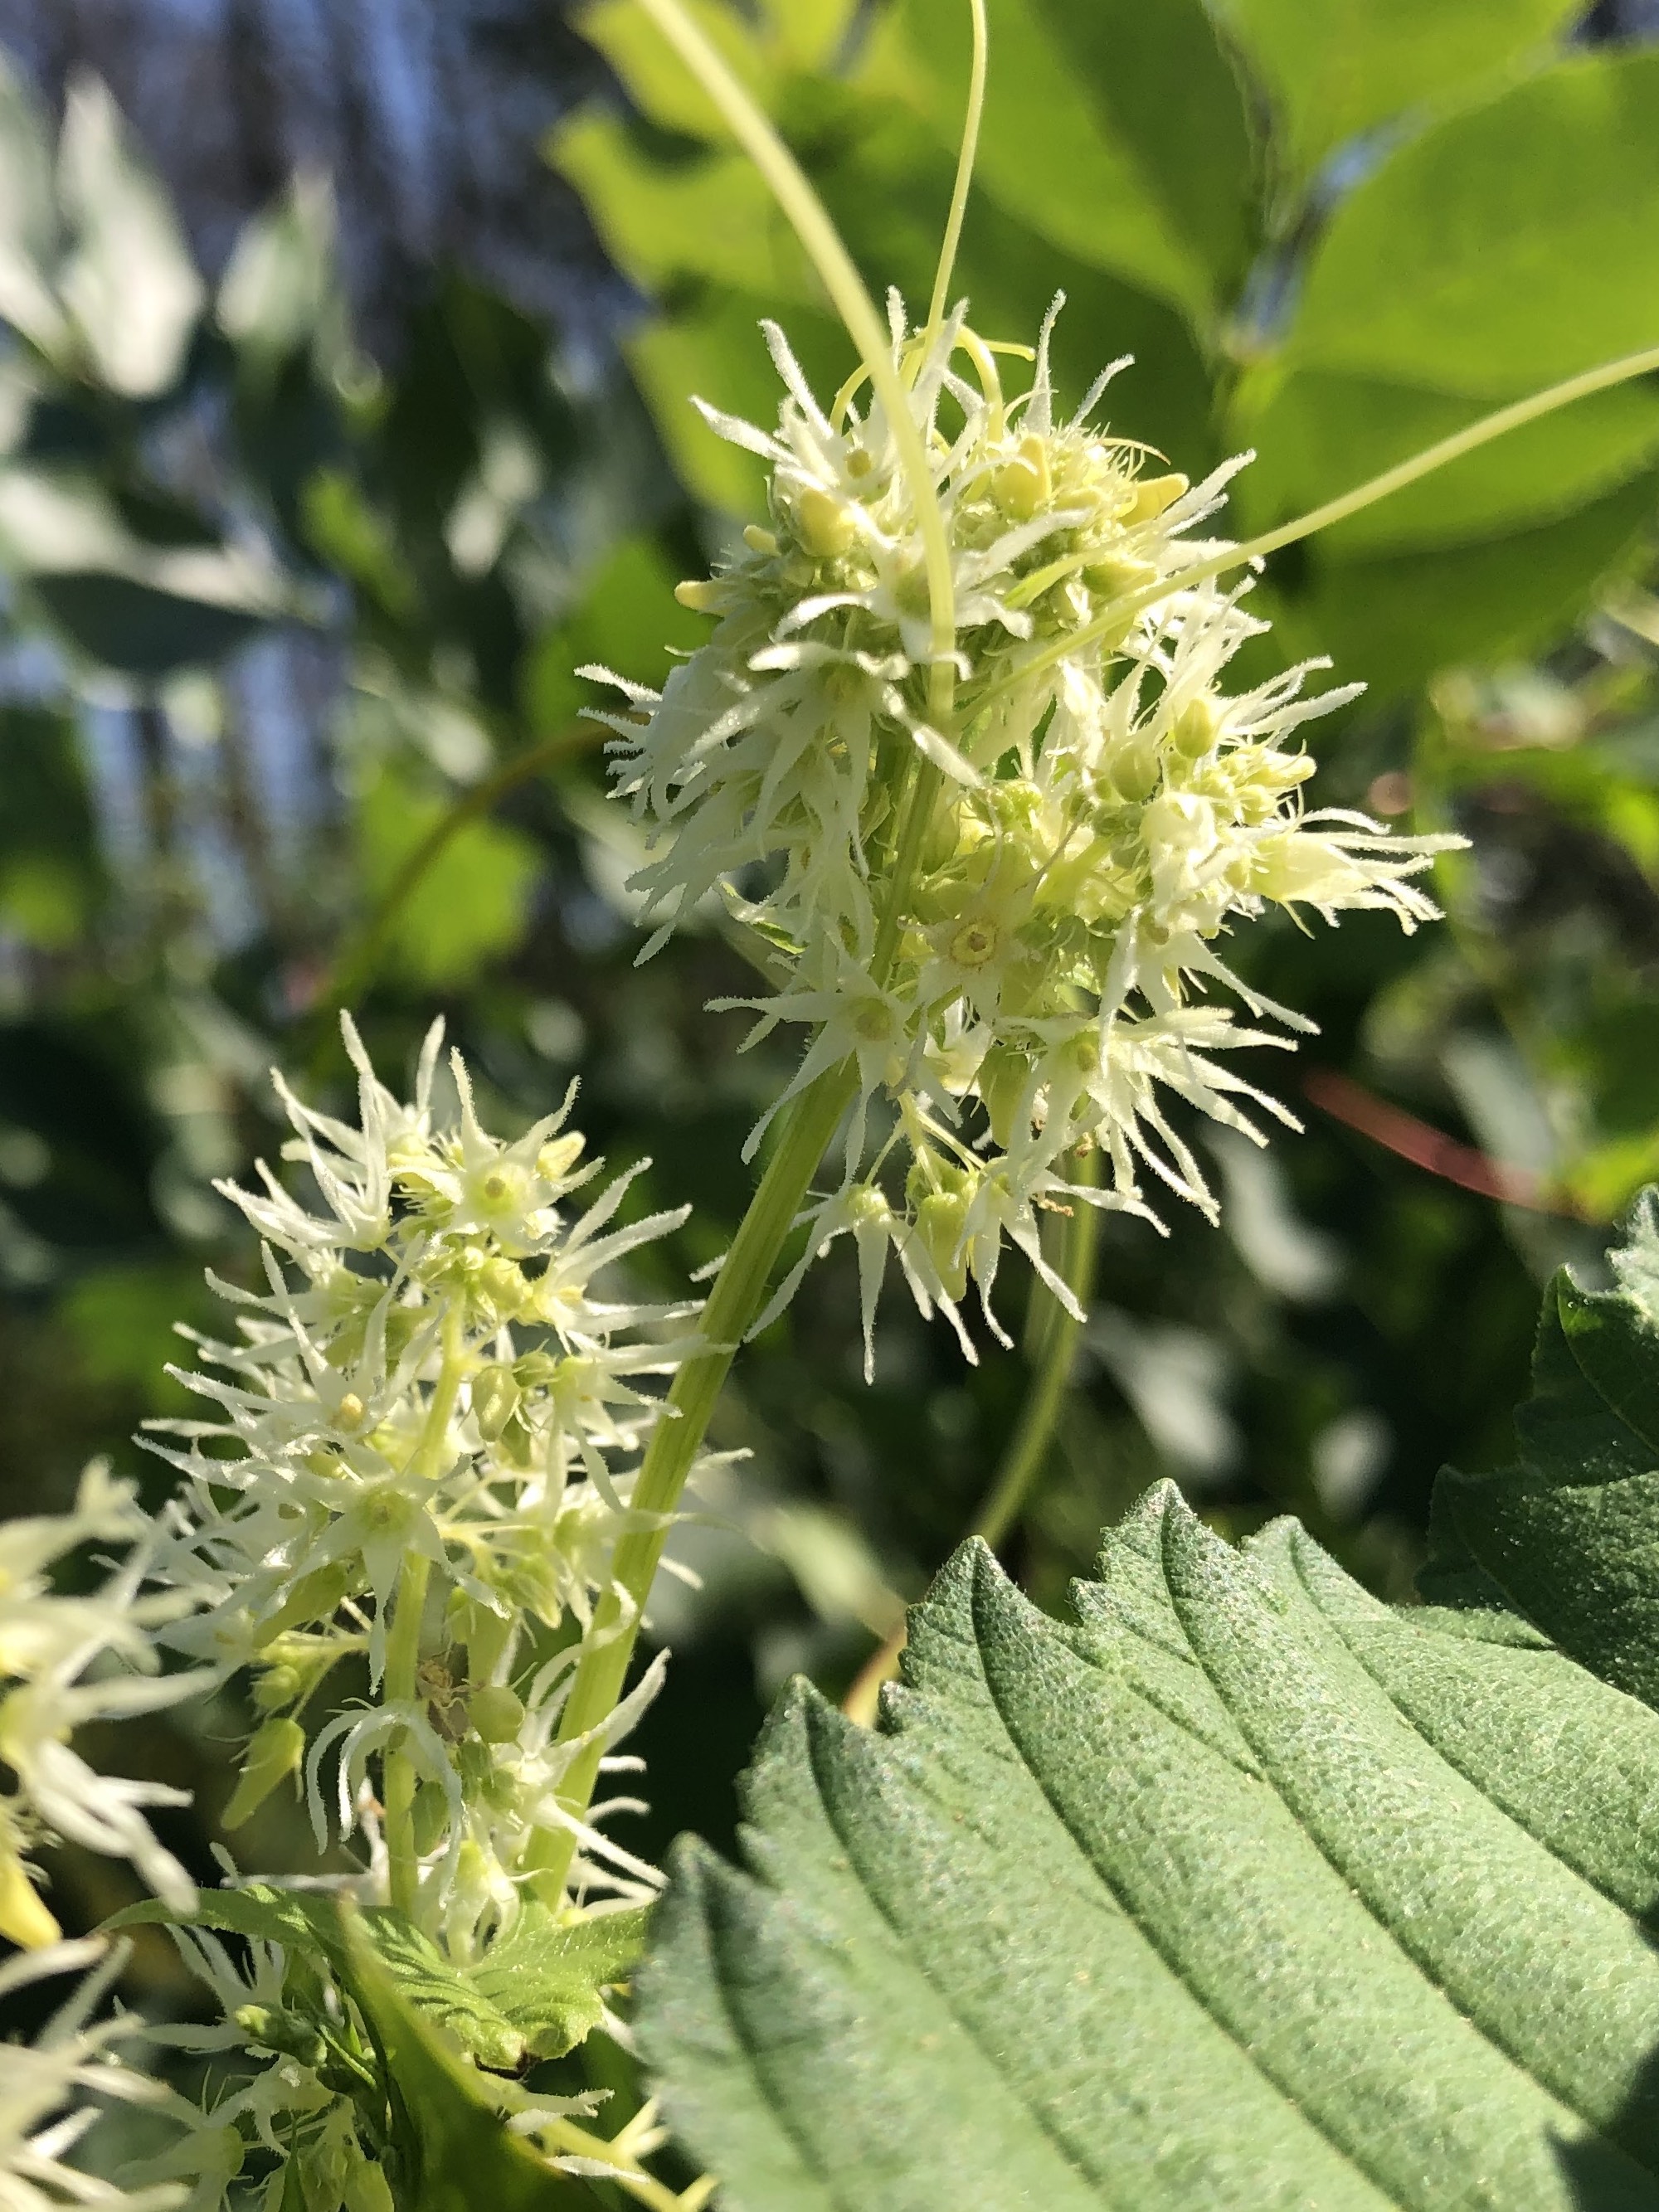 Wild Cucumber off of bike path behind Gregory Street in Madison, Wisconsin on August 14, 2020.